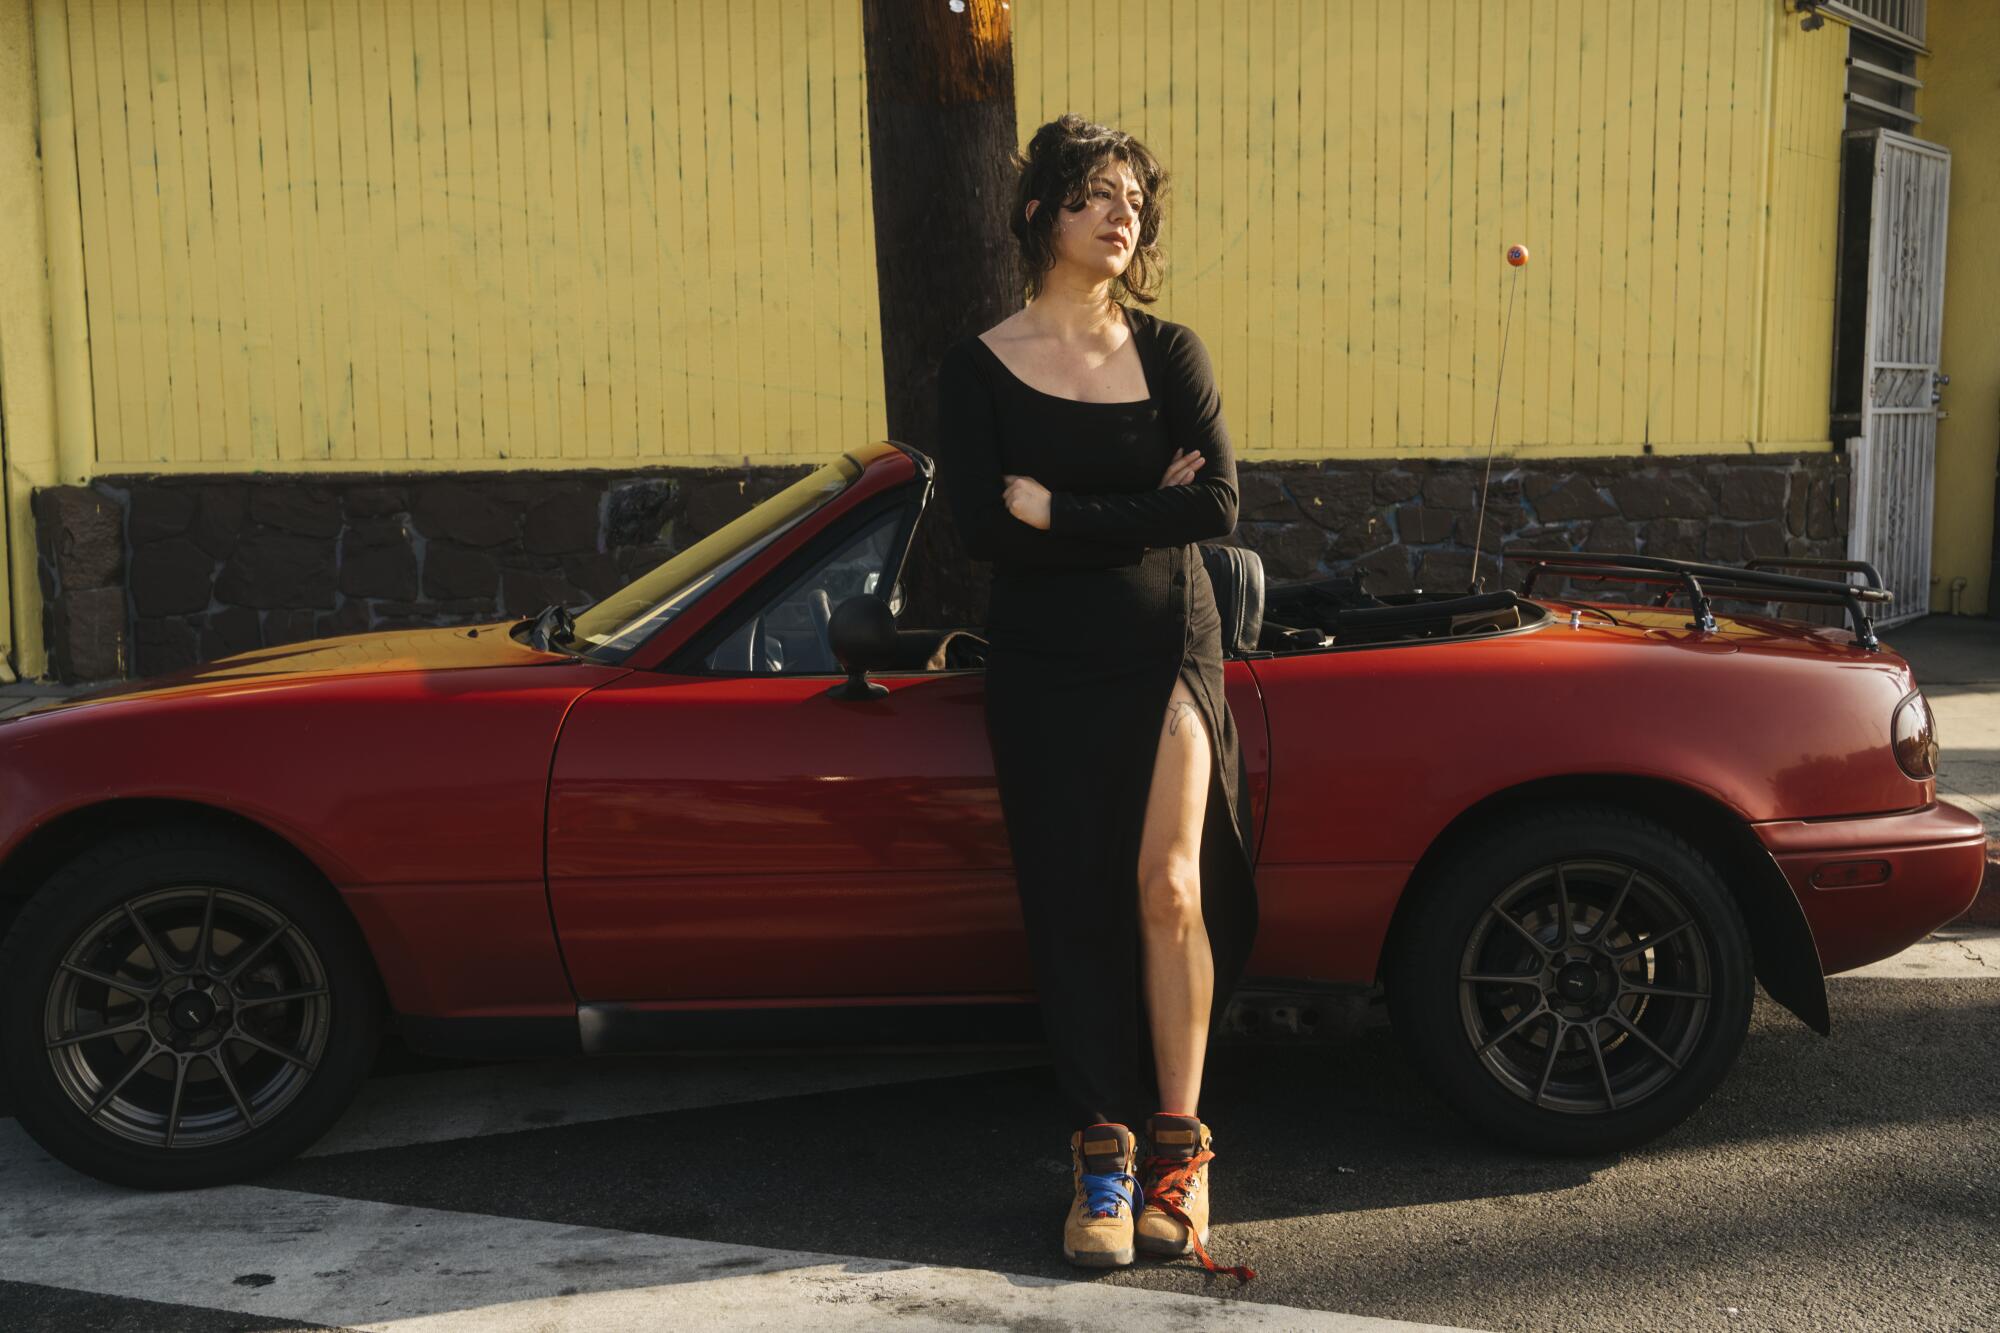 Christina Catherine Martinez, a comedian, writer, and art critic, poses for a portrait with her Mazda Miata.